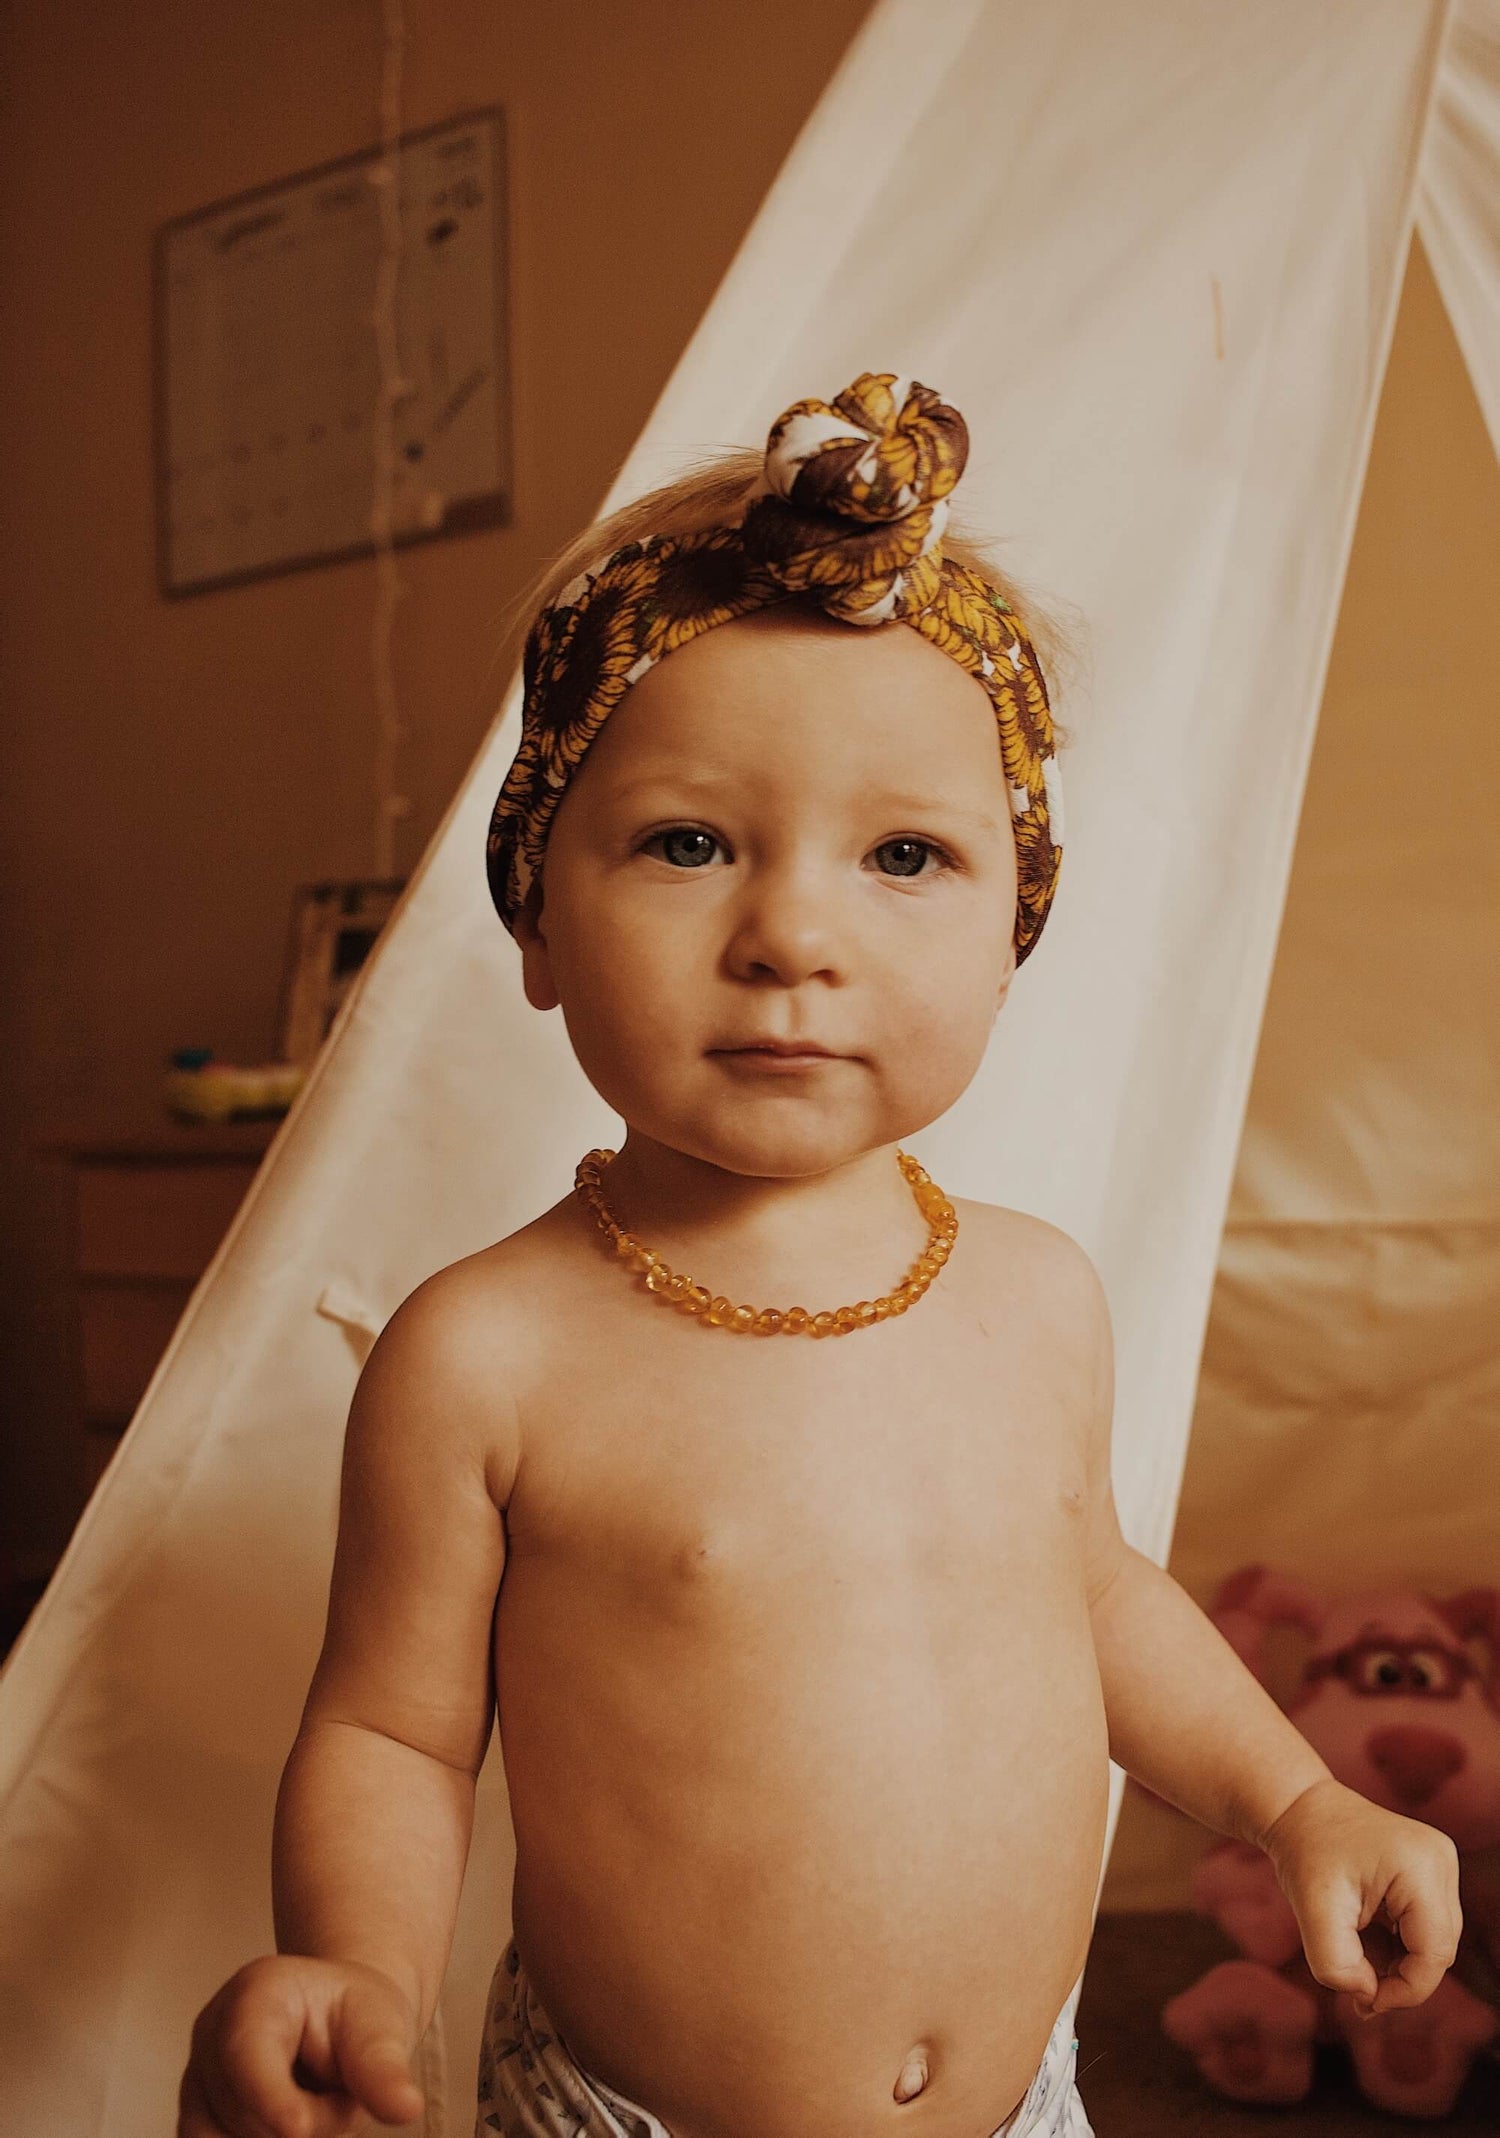 Baltic Amber For Baby - Protection Jewelry